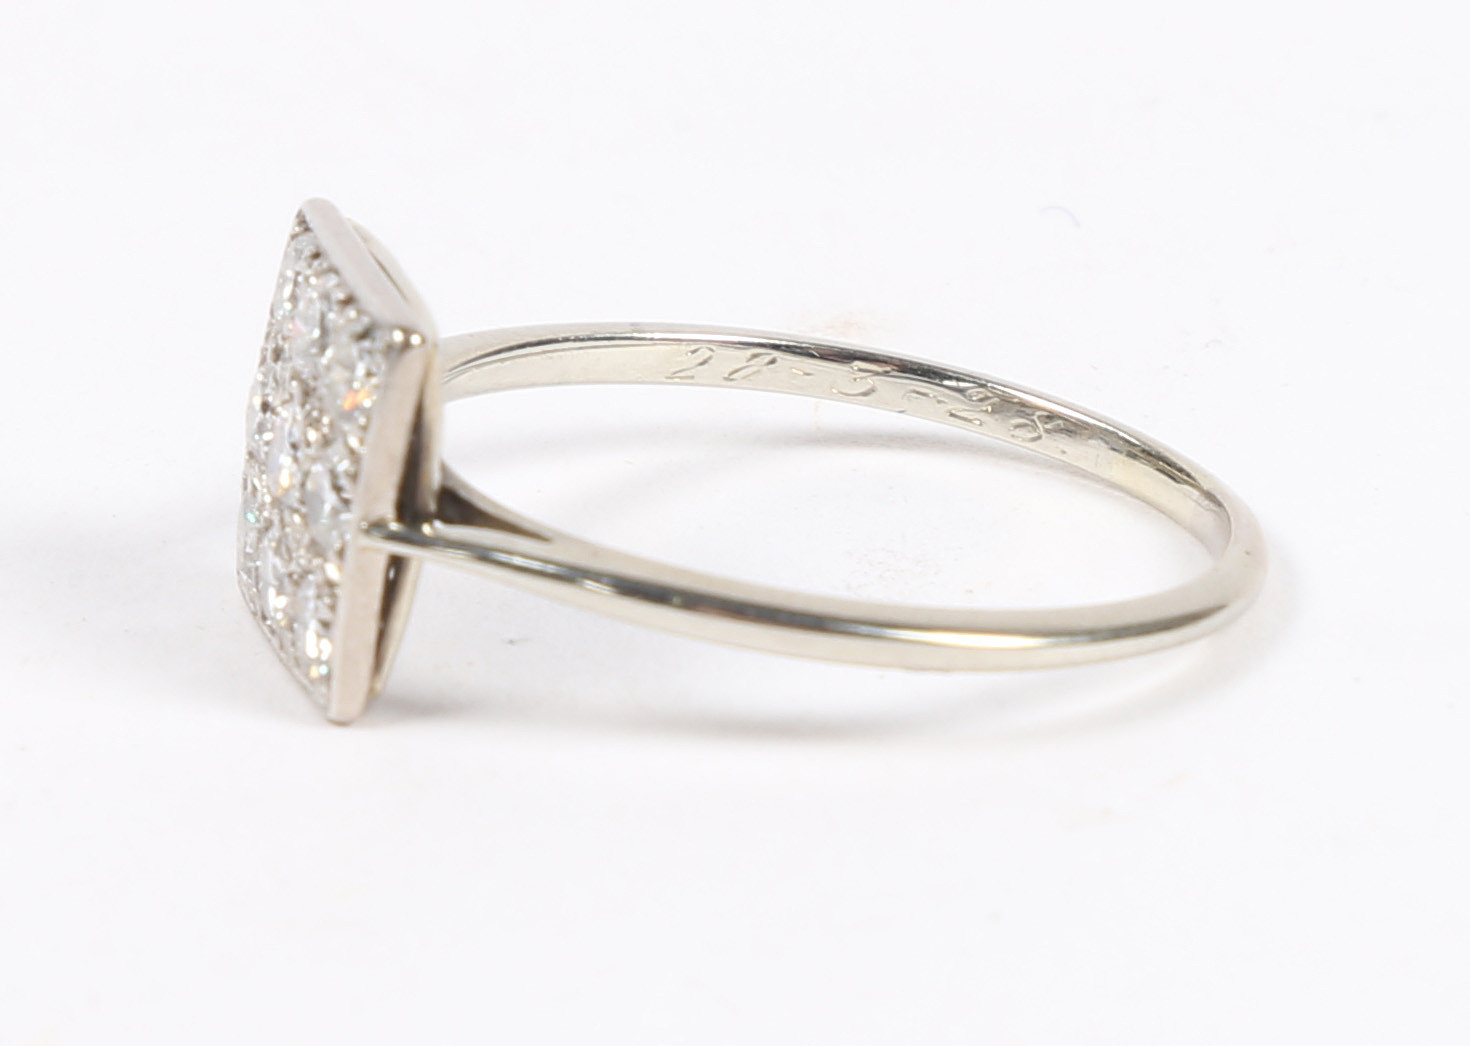 A PLATINUM AND DIAMOND RING. - Image 2 of 6